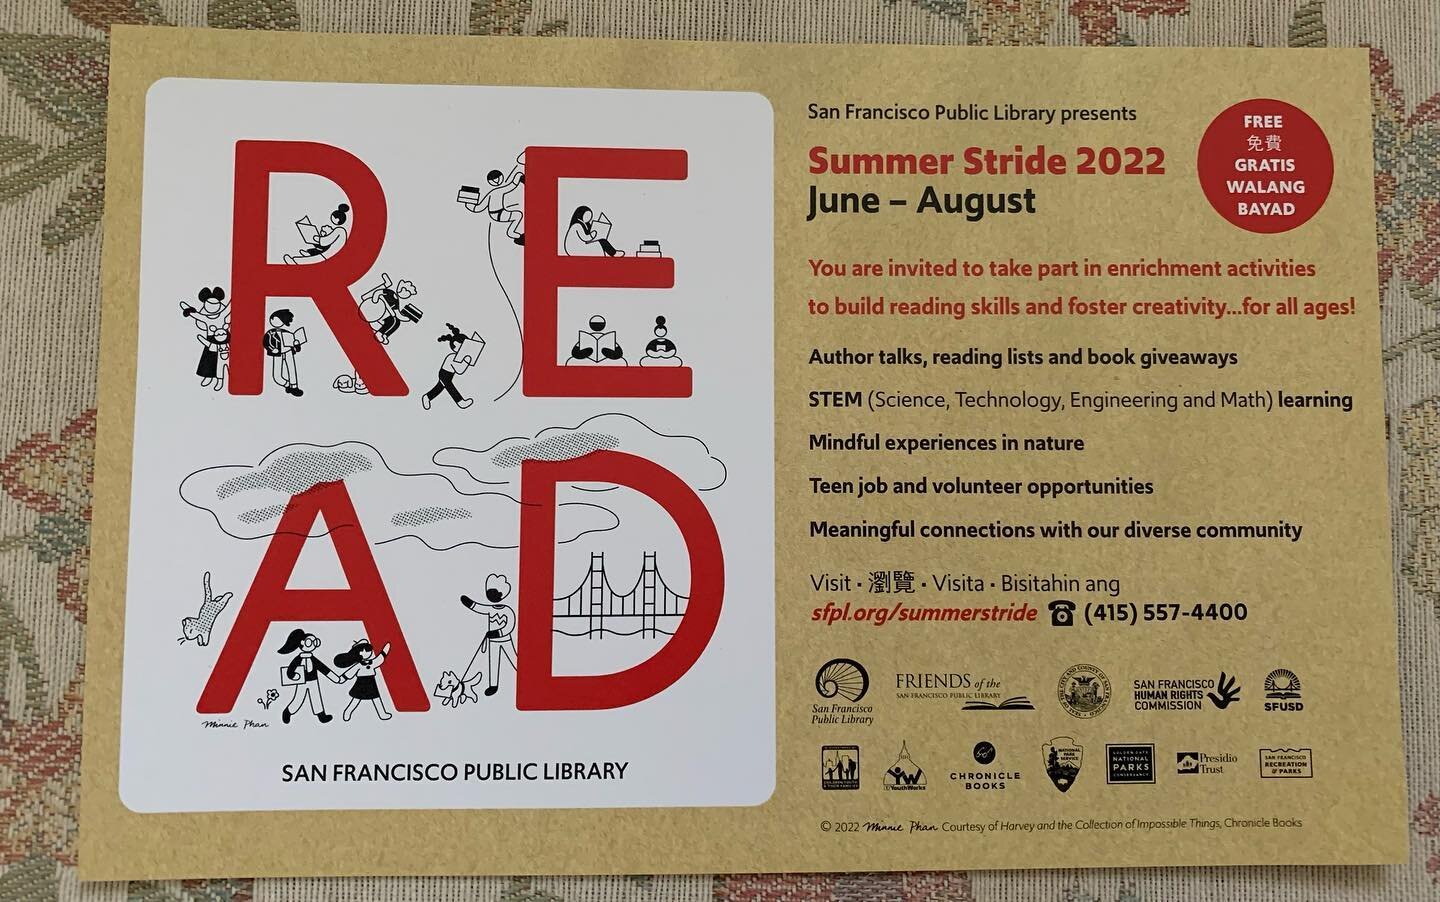 As I read with my #546plan peeps, I&rsquo;m thrilled that Harvey and the Collection of Impossible Things is part of 2022&rsquo;s Summer Stride reading program at the San Francisco Library. And the great Minnie Phan is the program&rsquo;s artist. Join